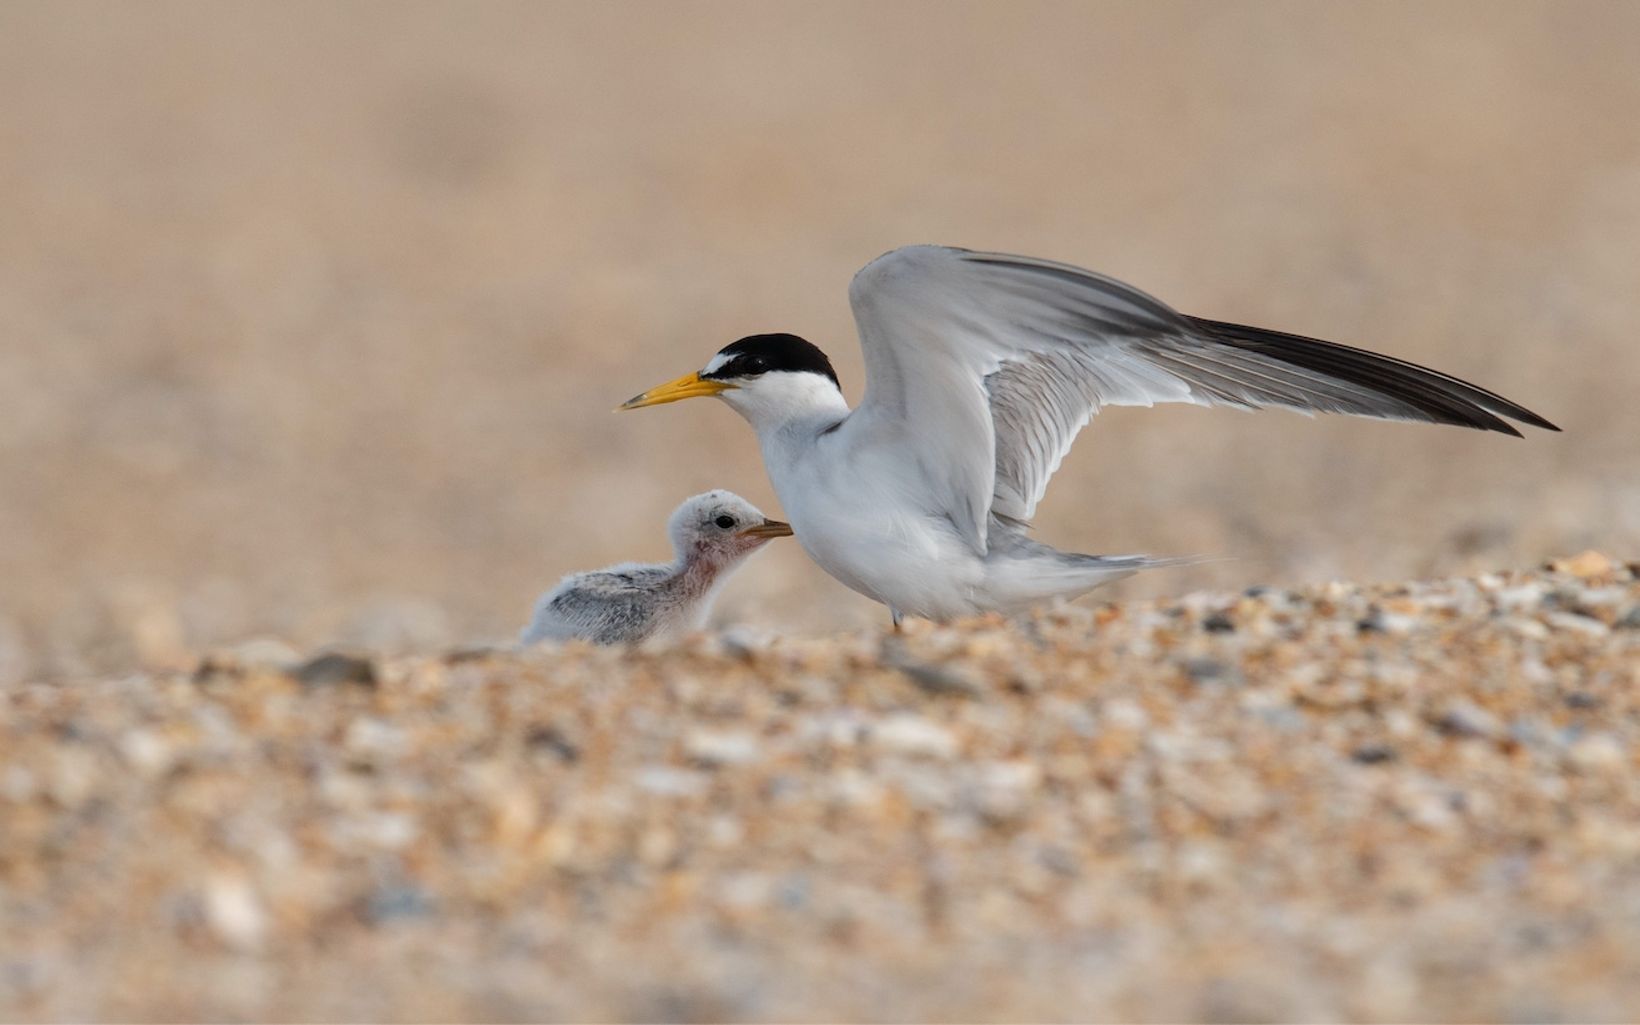 Least Tern with Chick Migratory shorebirds, like the least tern, can be found nesting along the New Jersey shore in the spring and summer.  © Shutterstock